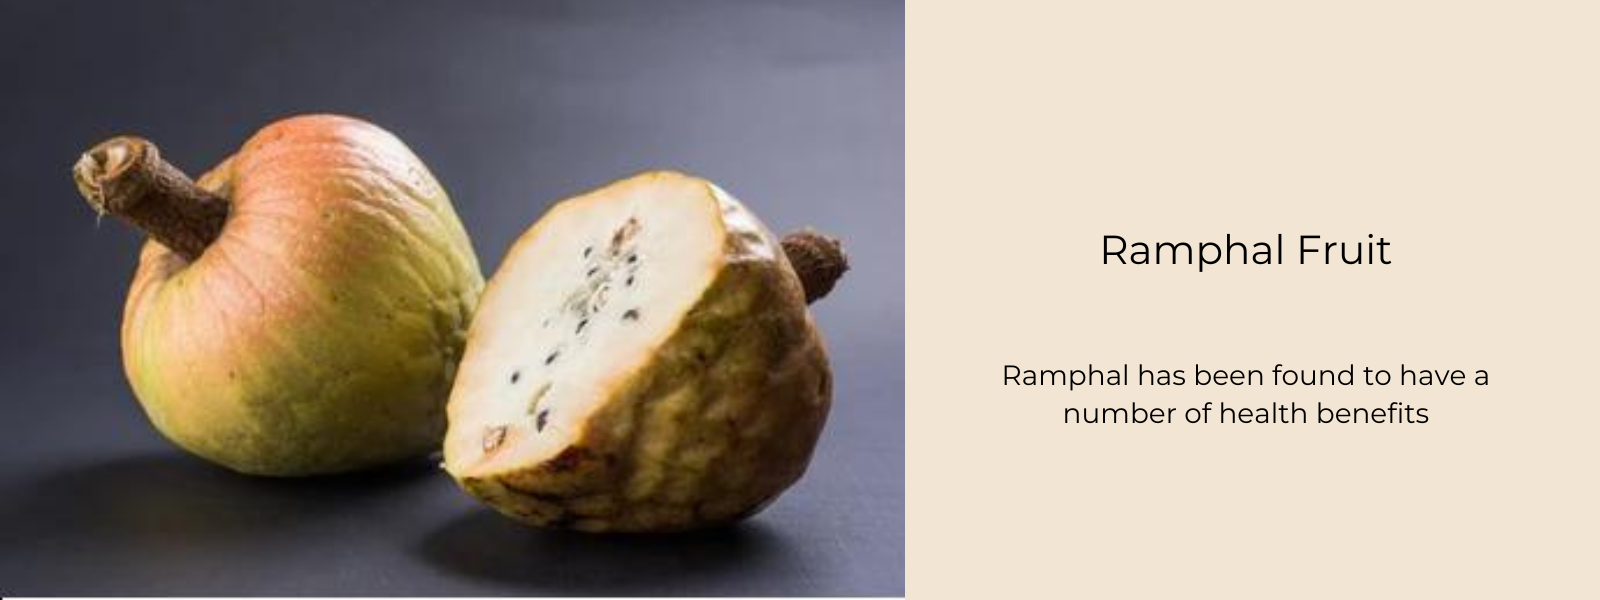 Ramphal Fruit - Health Benefits, Uses and Important Facts